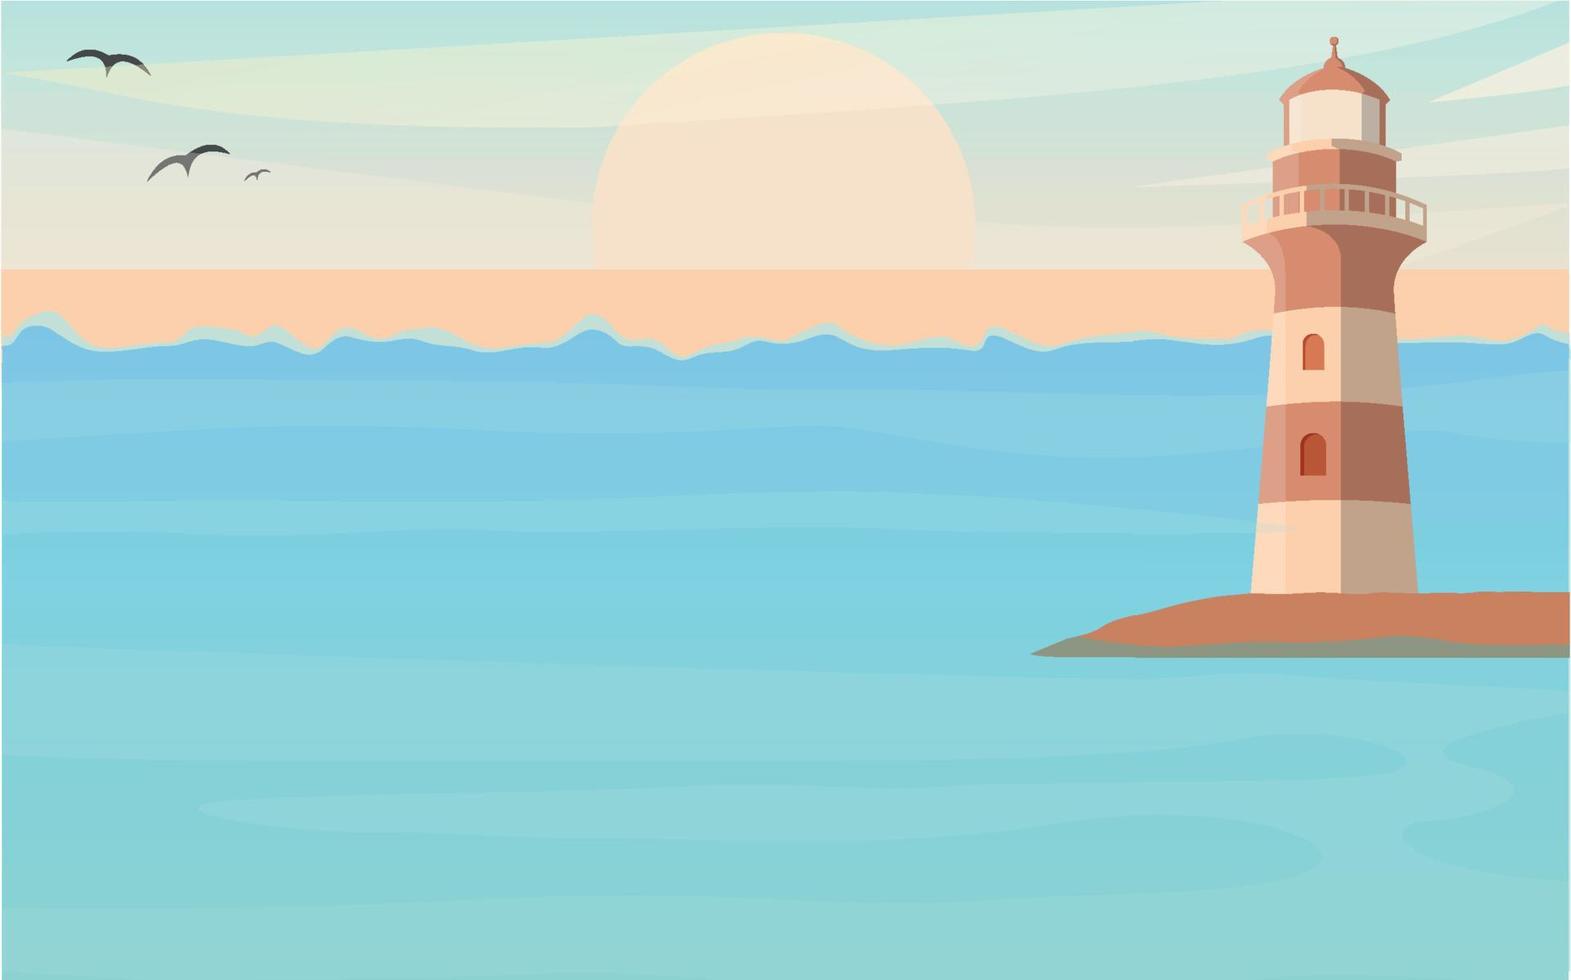 Lighthouse by the sea. Seascape, signal building by the sea. Coast landscape with lighthouse. Vector illustration